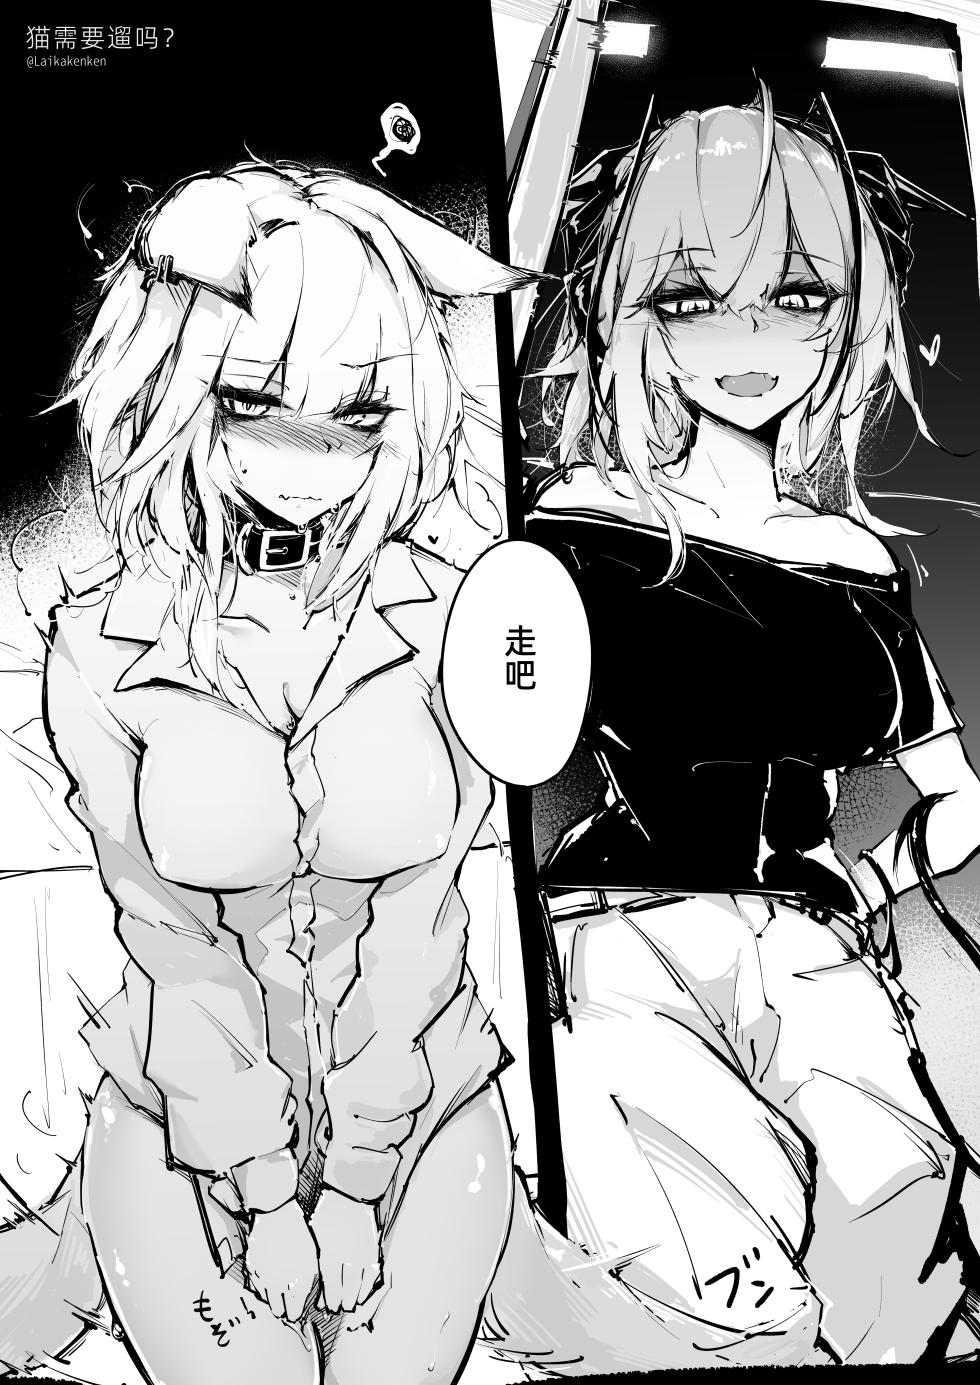 [RKZROK] Doujin_KxW (01-07p) (Arknights) [Chinese] [机翻] [Ongoing] - Page 2